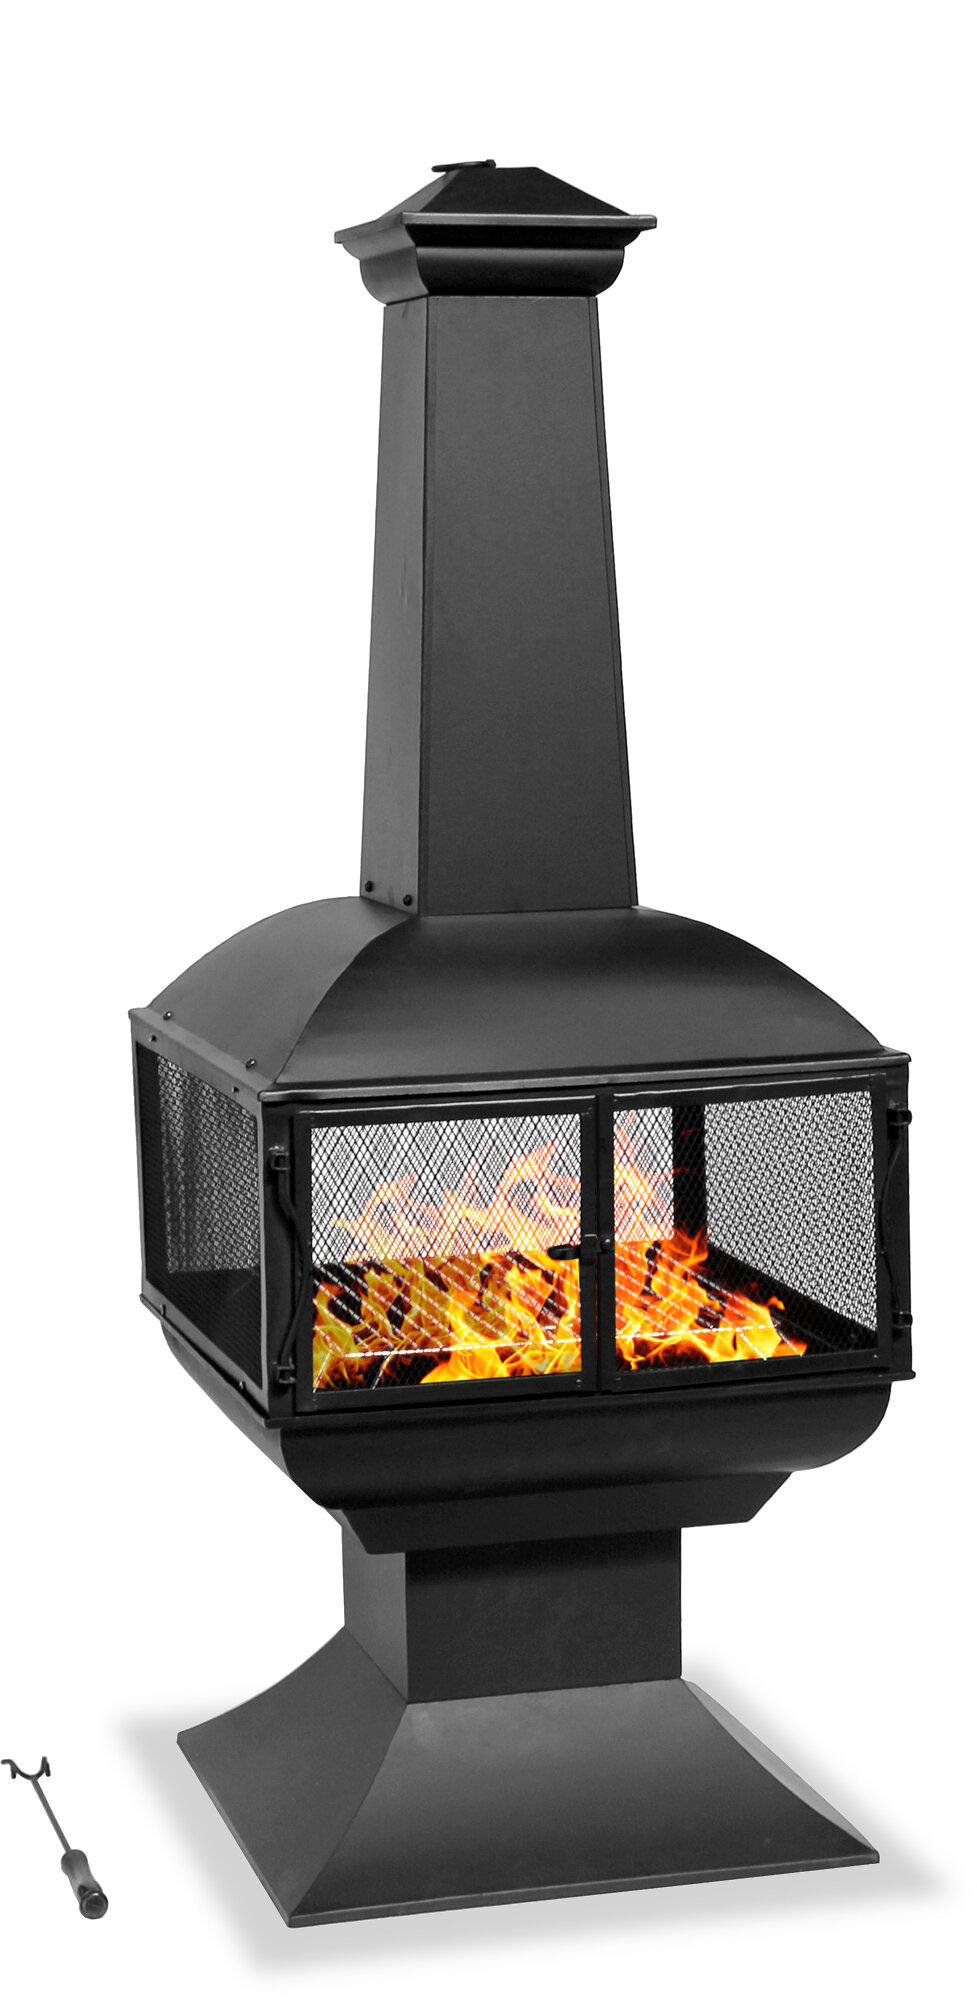 Fireplace and Chimney Authority Beautiful Hansville Steel Charcoal Wood Burning Outdoor Fireplace